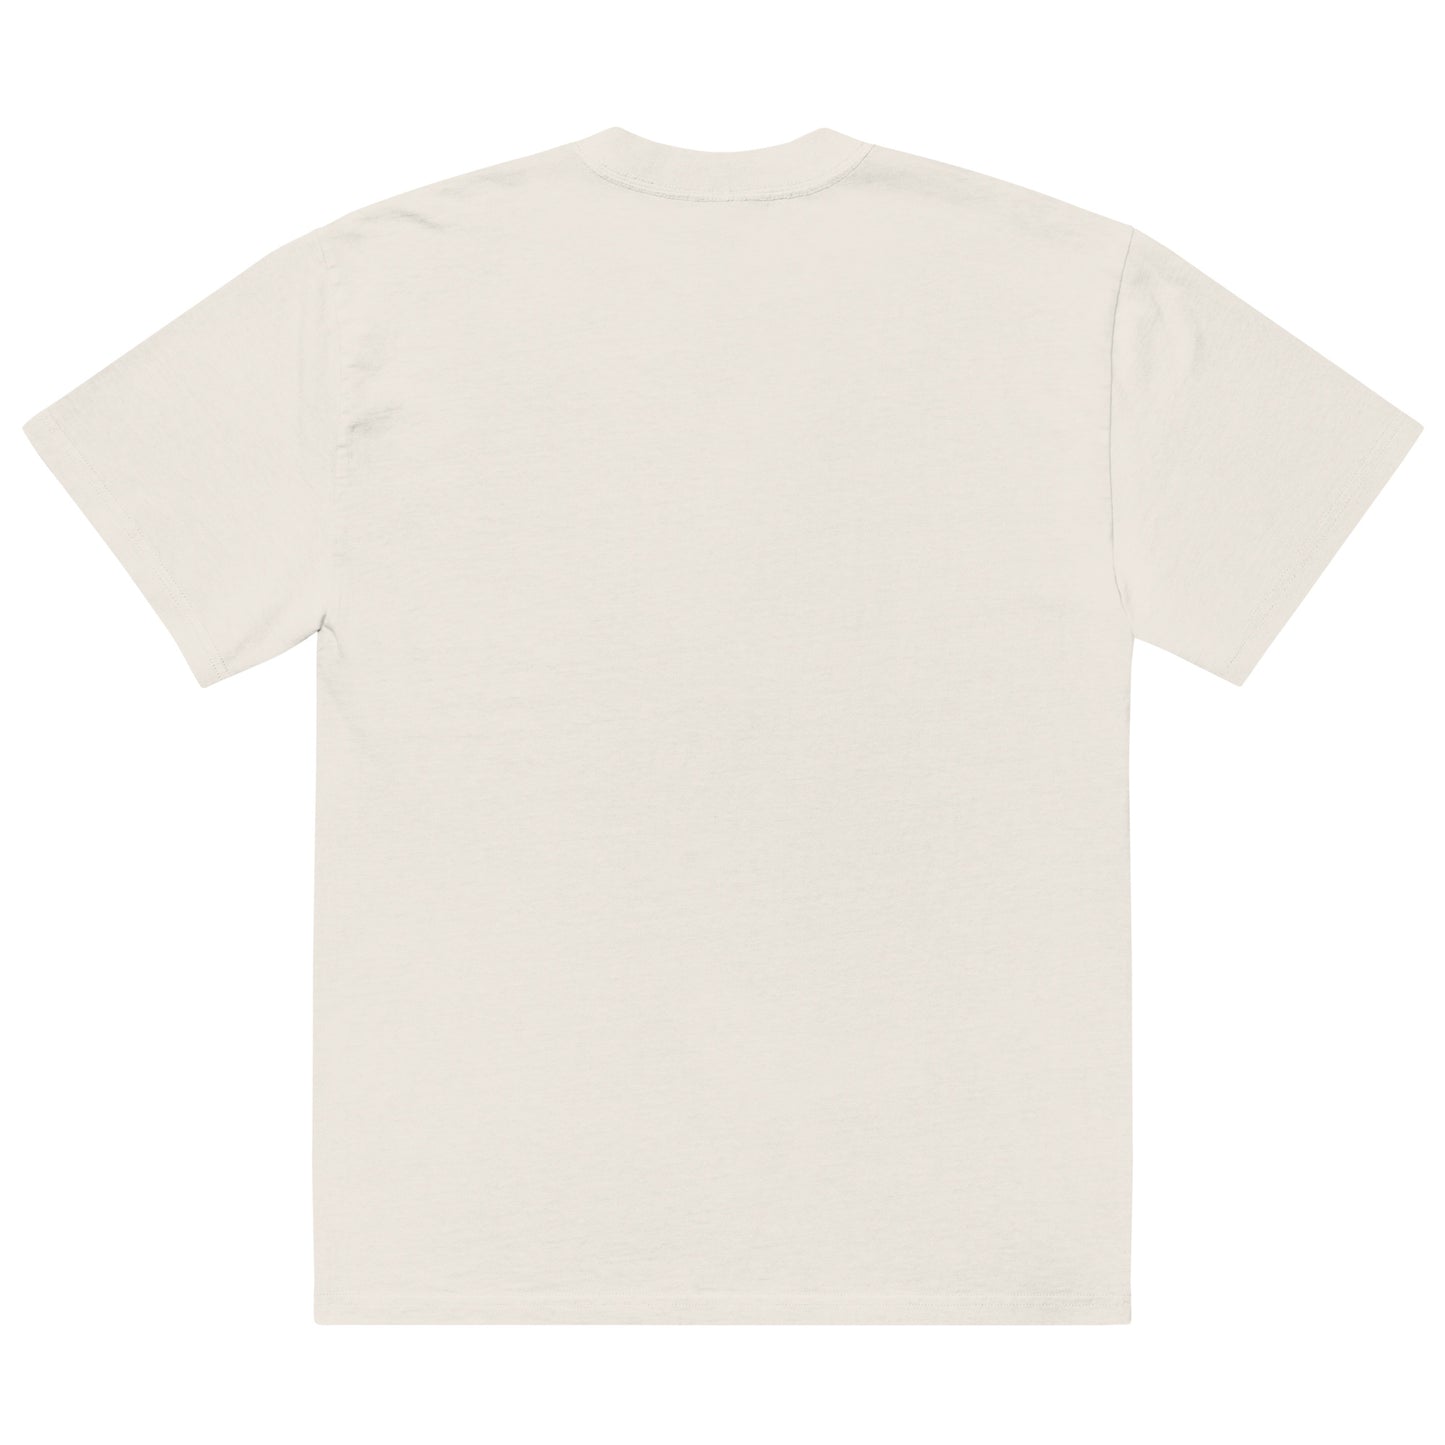 Sqdltd AU23 Goals Embroidered Oversized faded Tee WL